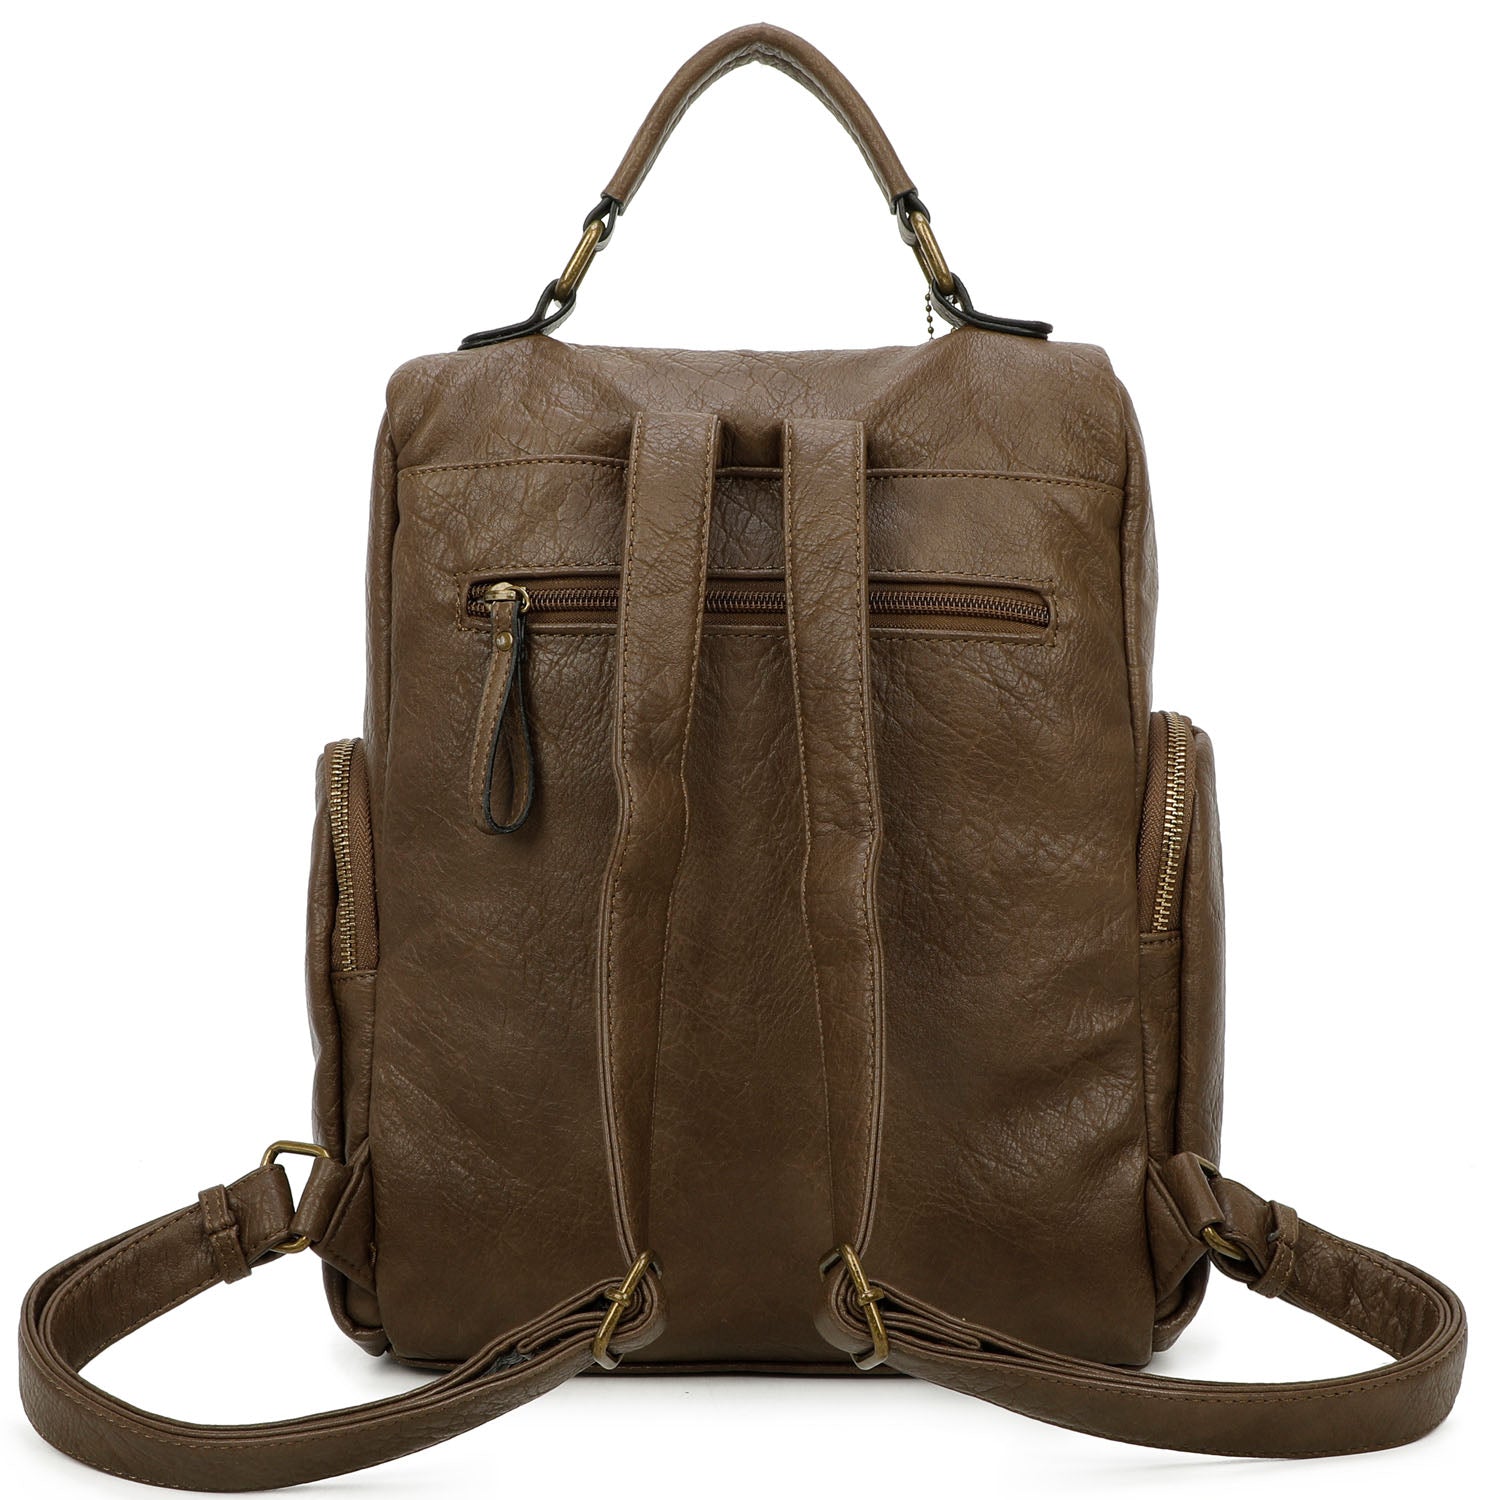 Chase Backpack - Taupe